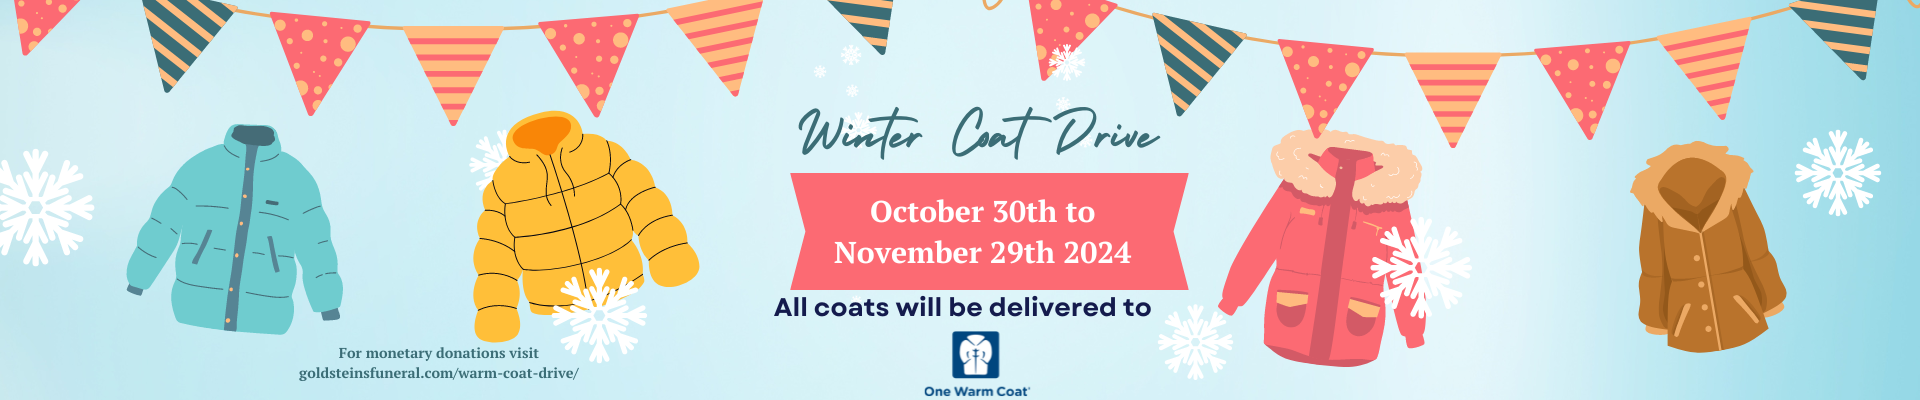 Coat Drive for One Warm Coat collecting gently worn or new coats and jacket